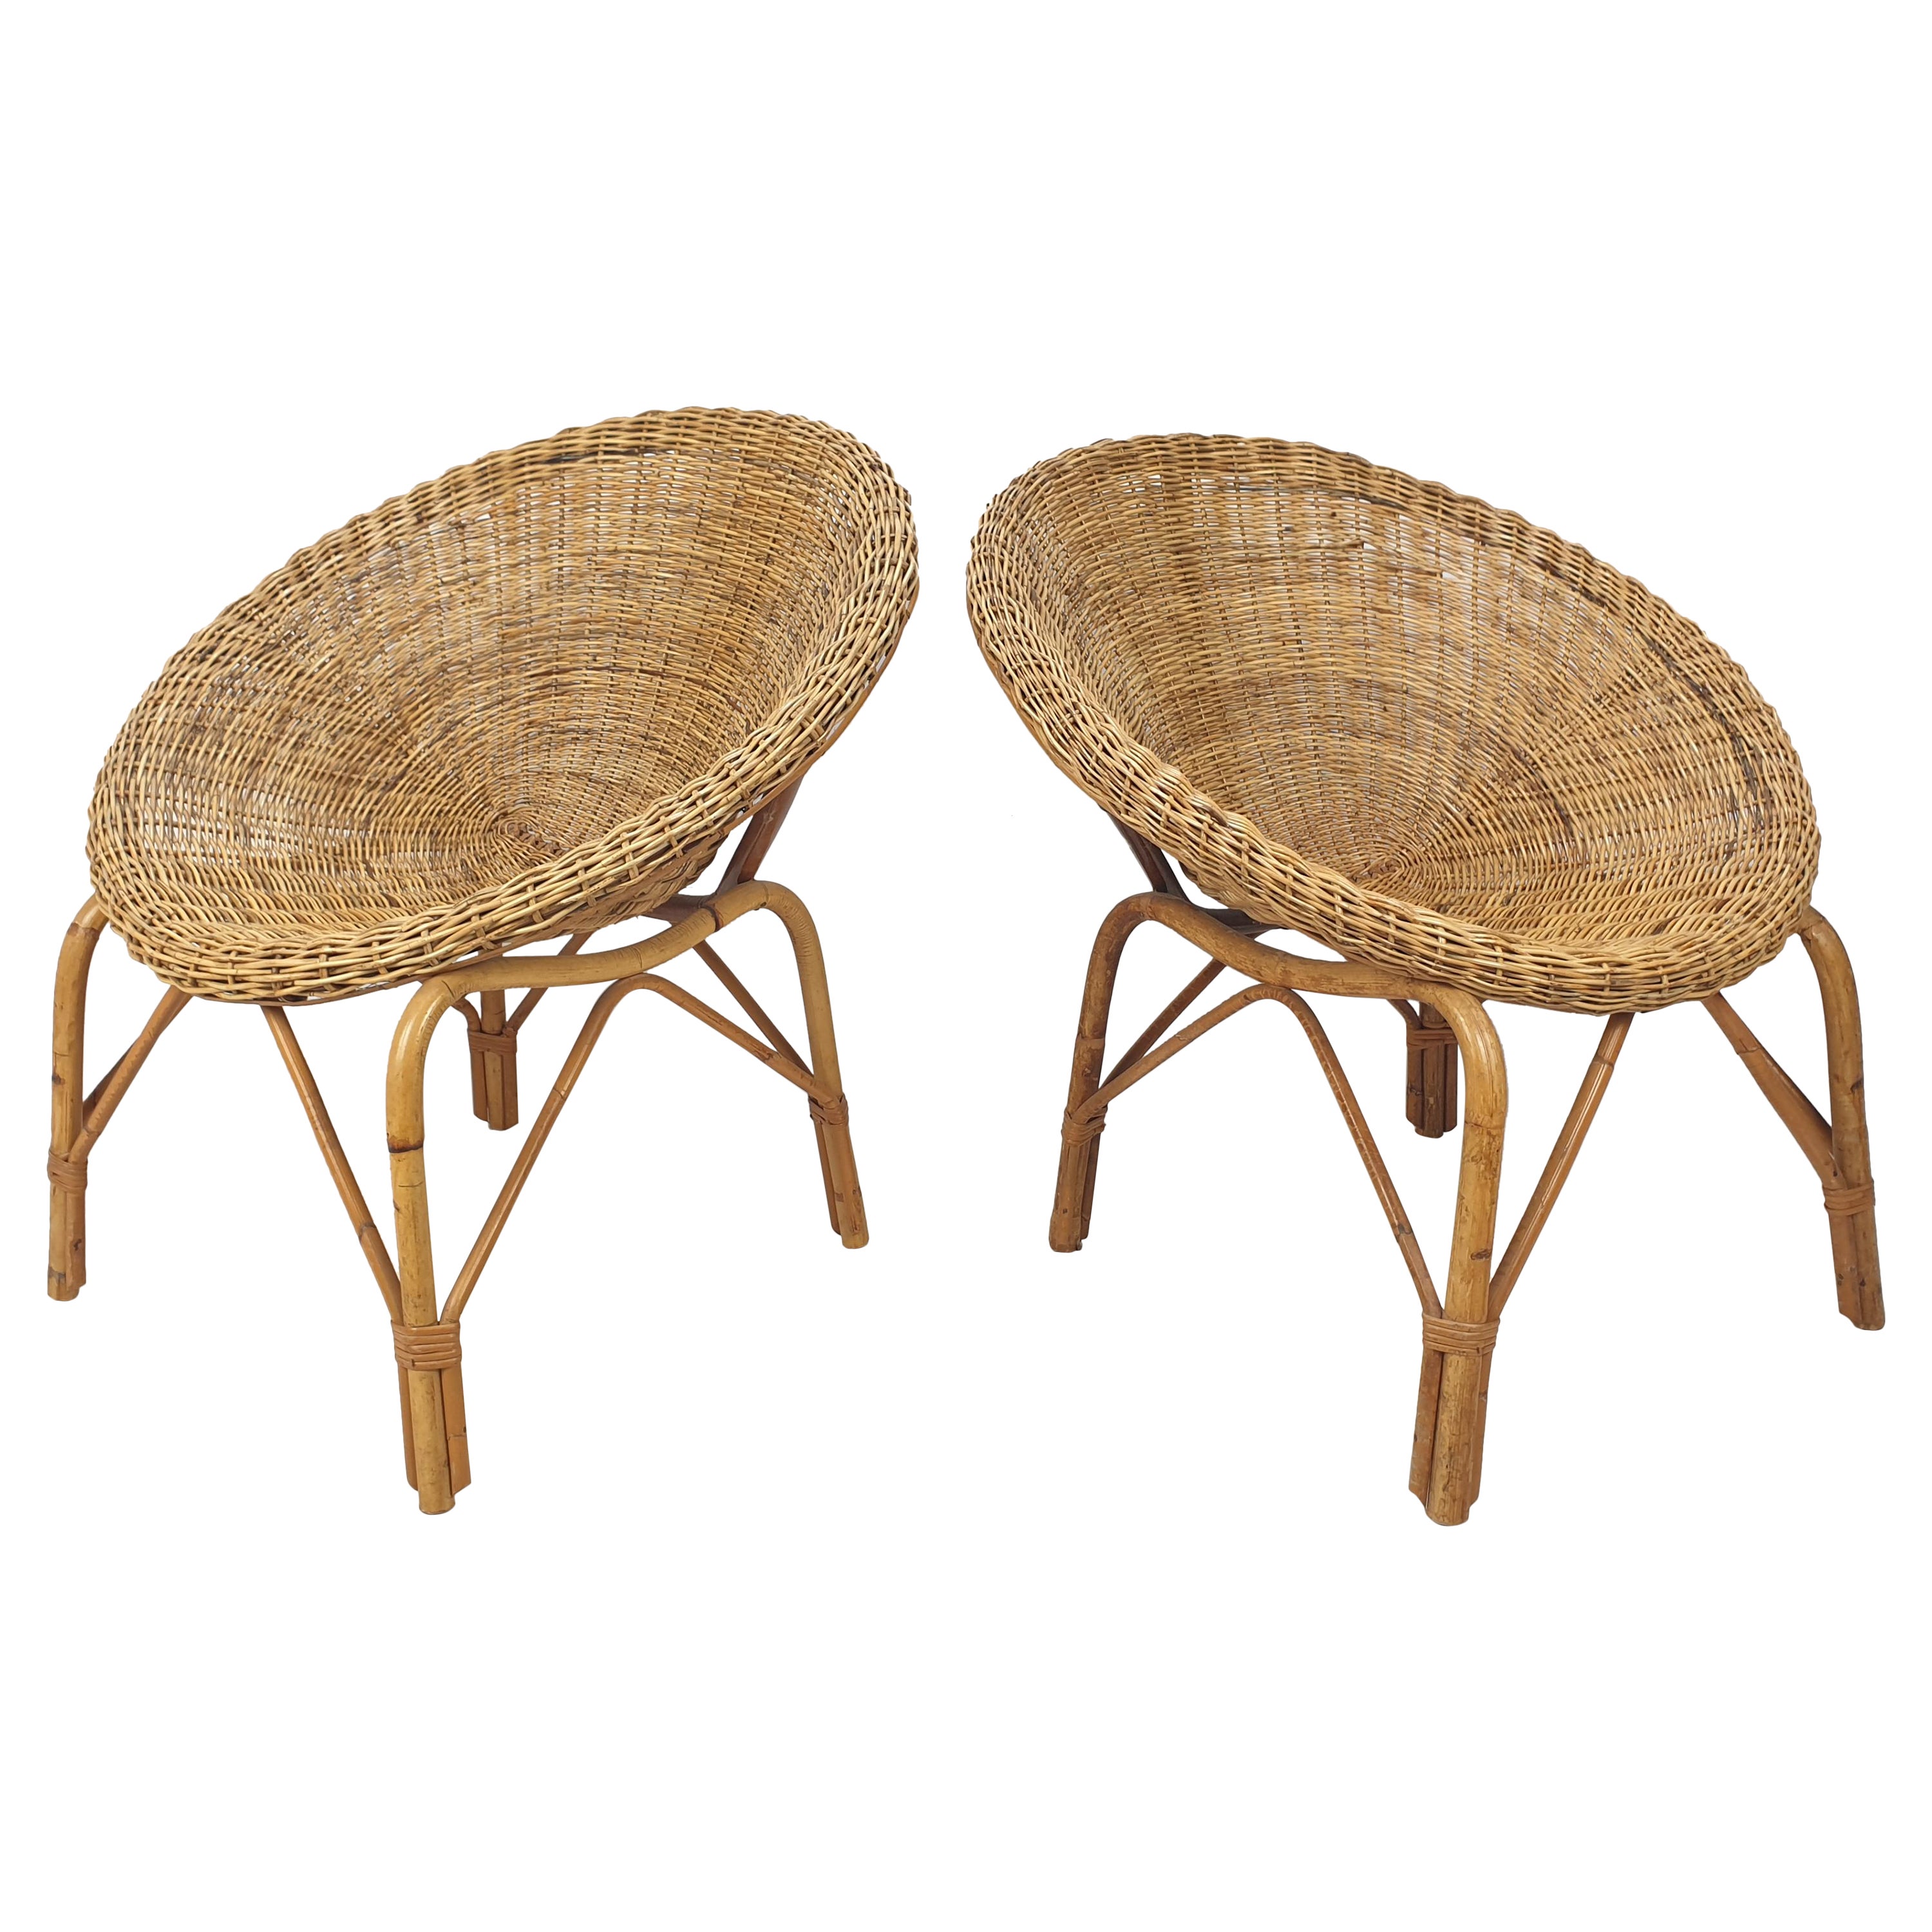 Pair of Italian Mid Century Rattan and Wicker Lounge Chairs, 1960's